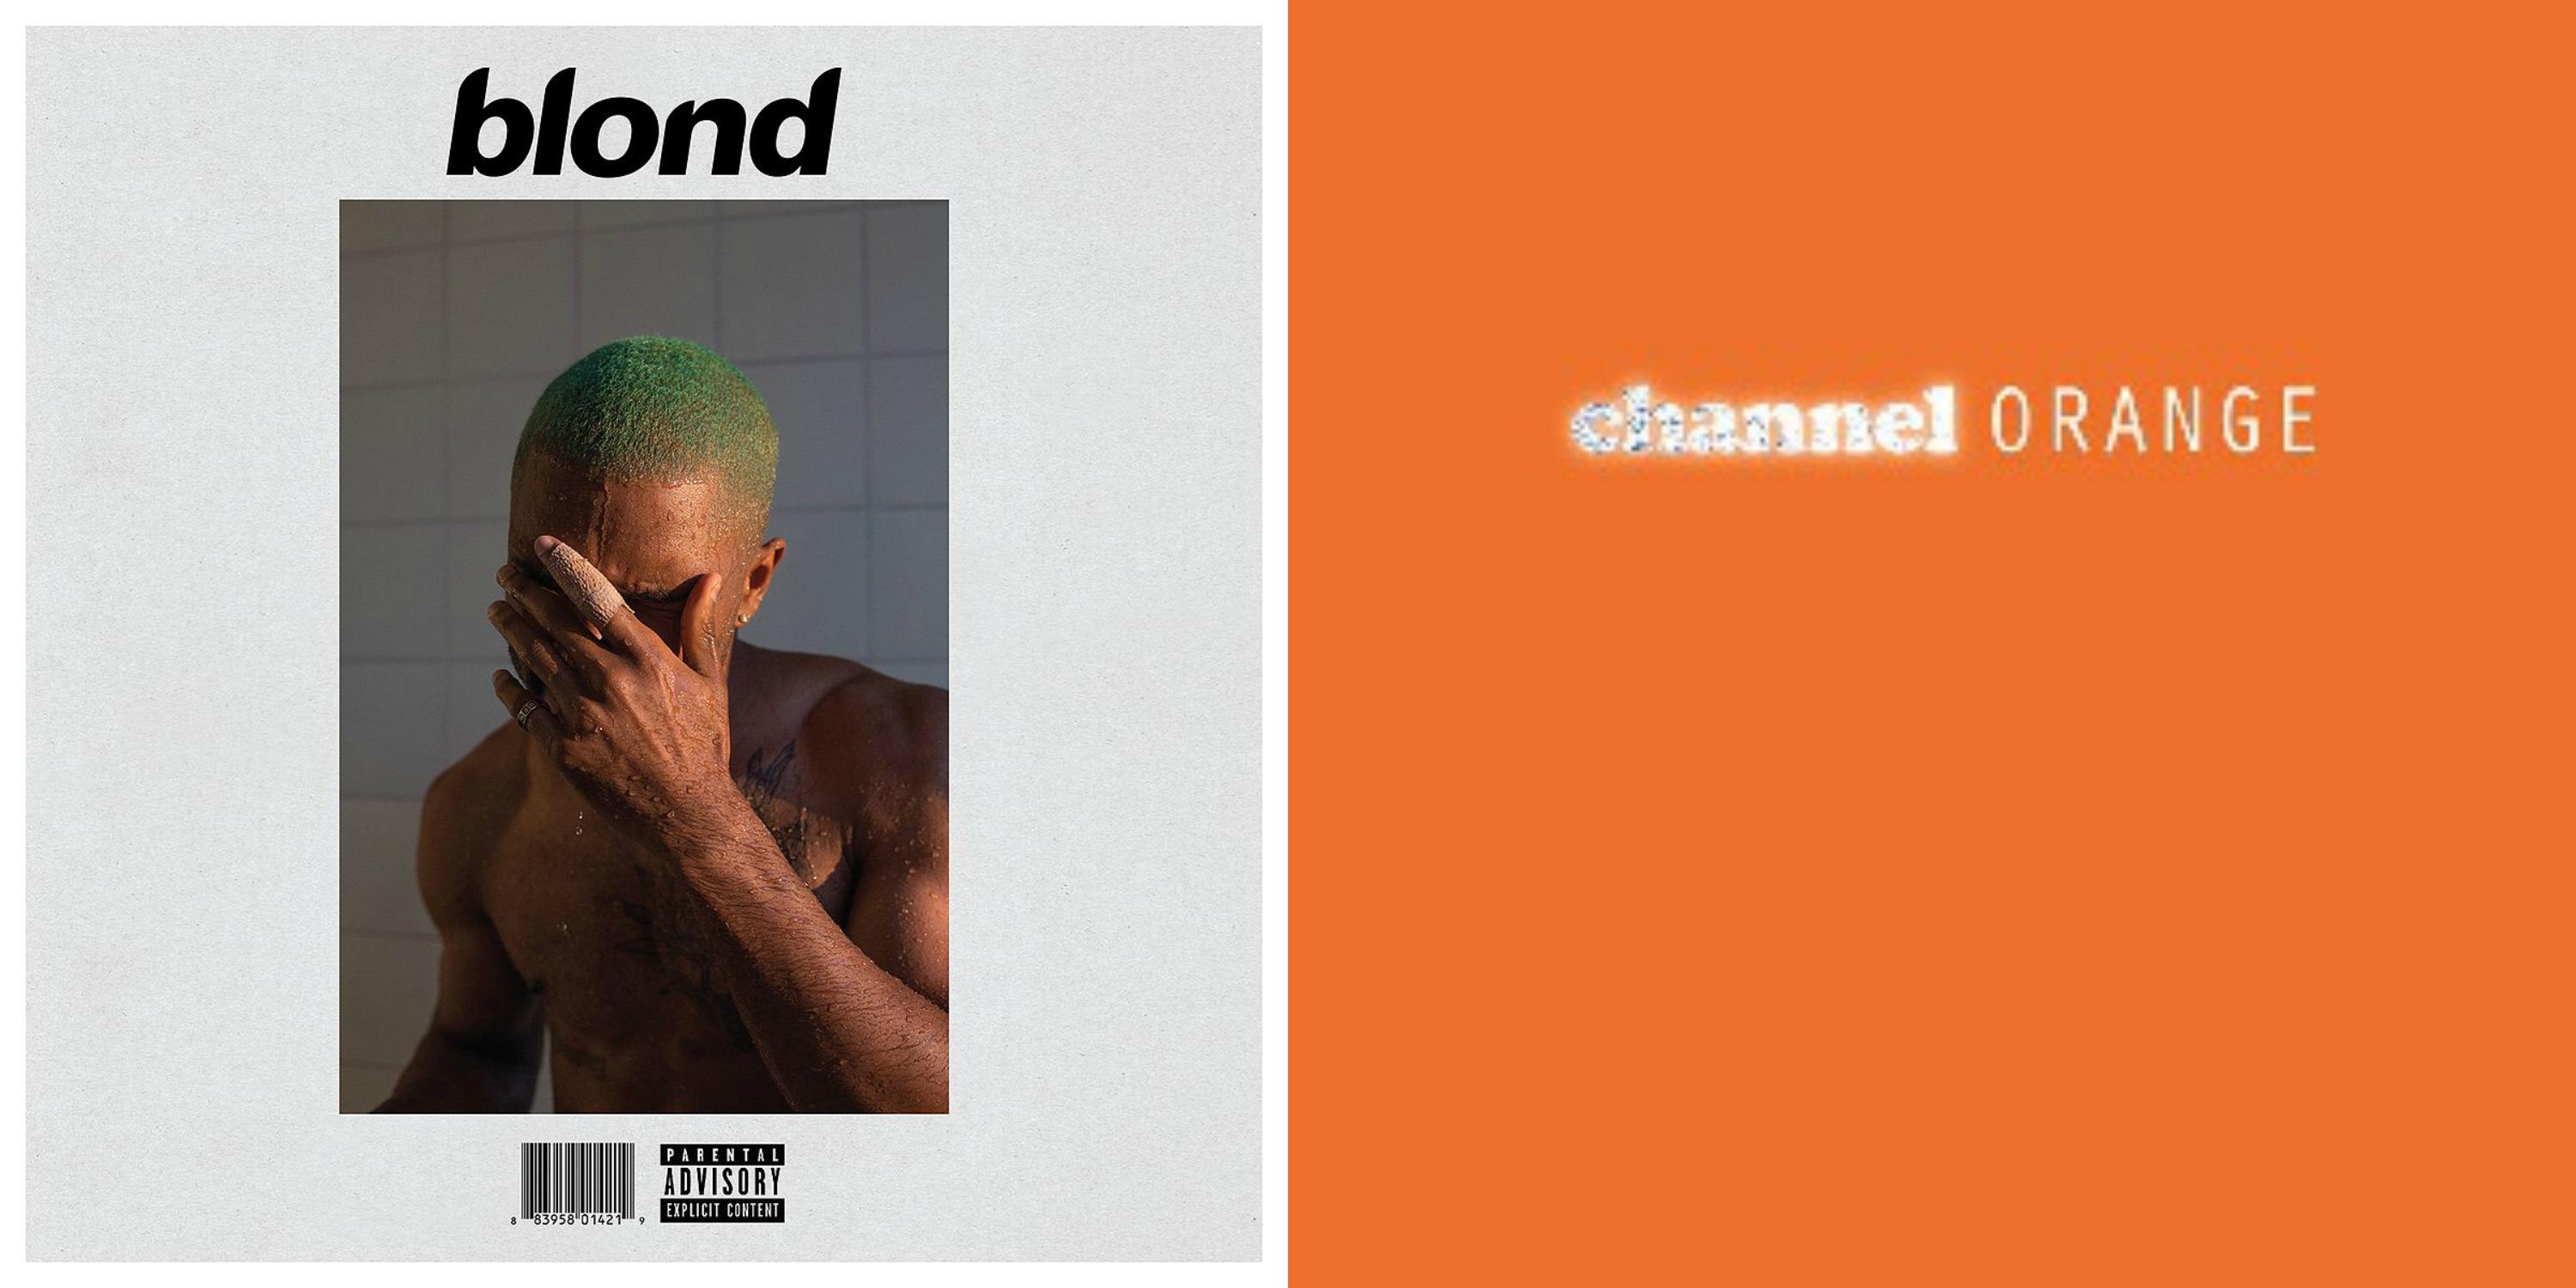 Frank Ocean has officially dropped a new album called Blonde. 